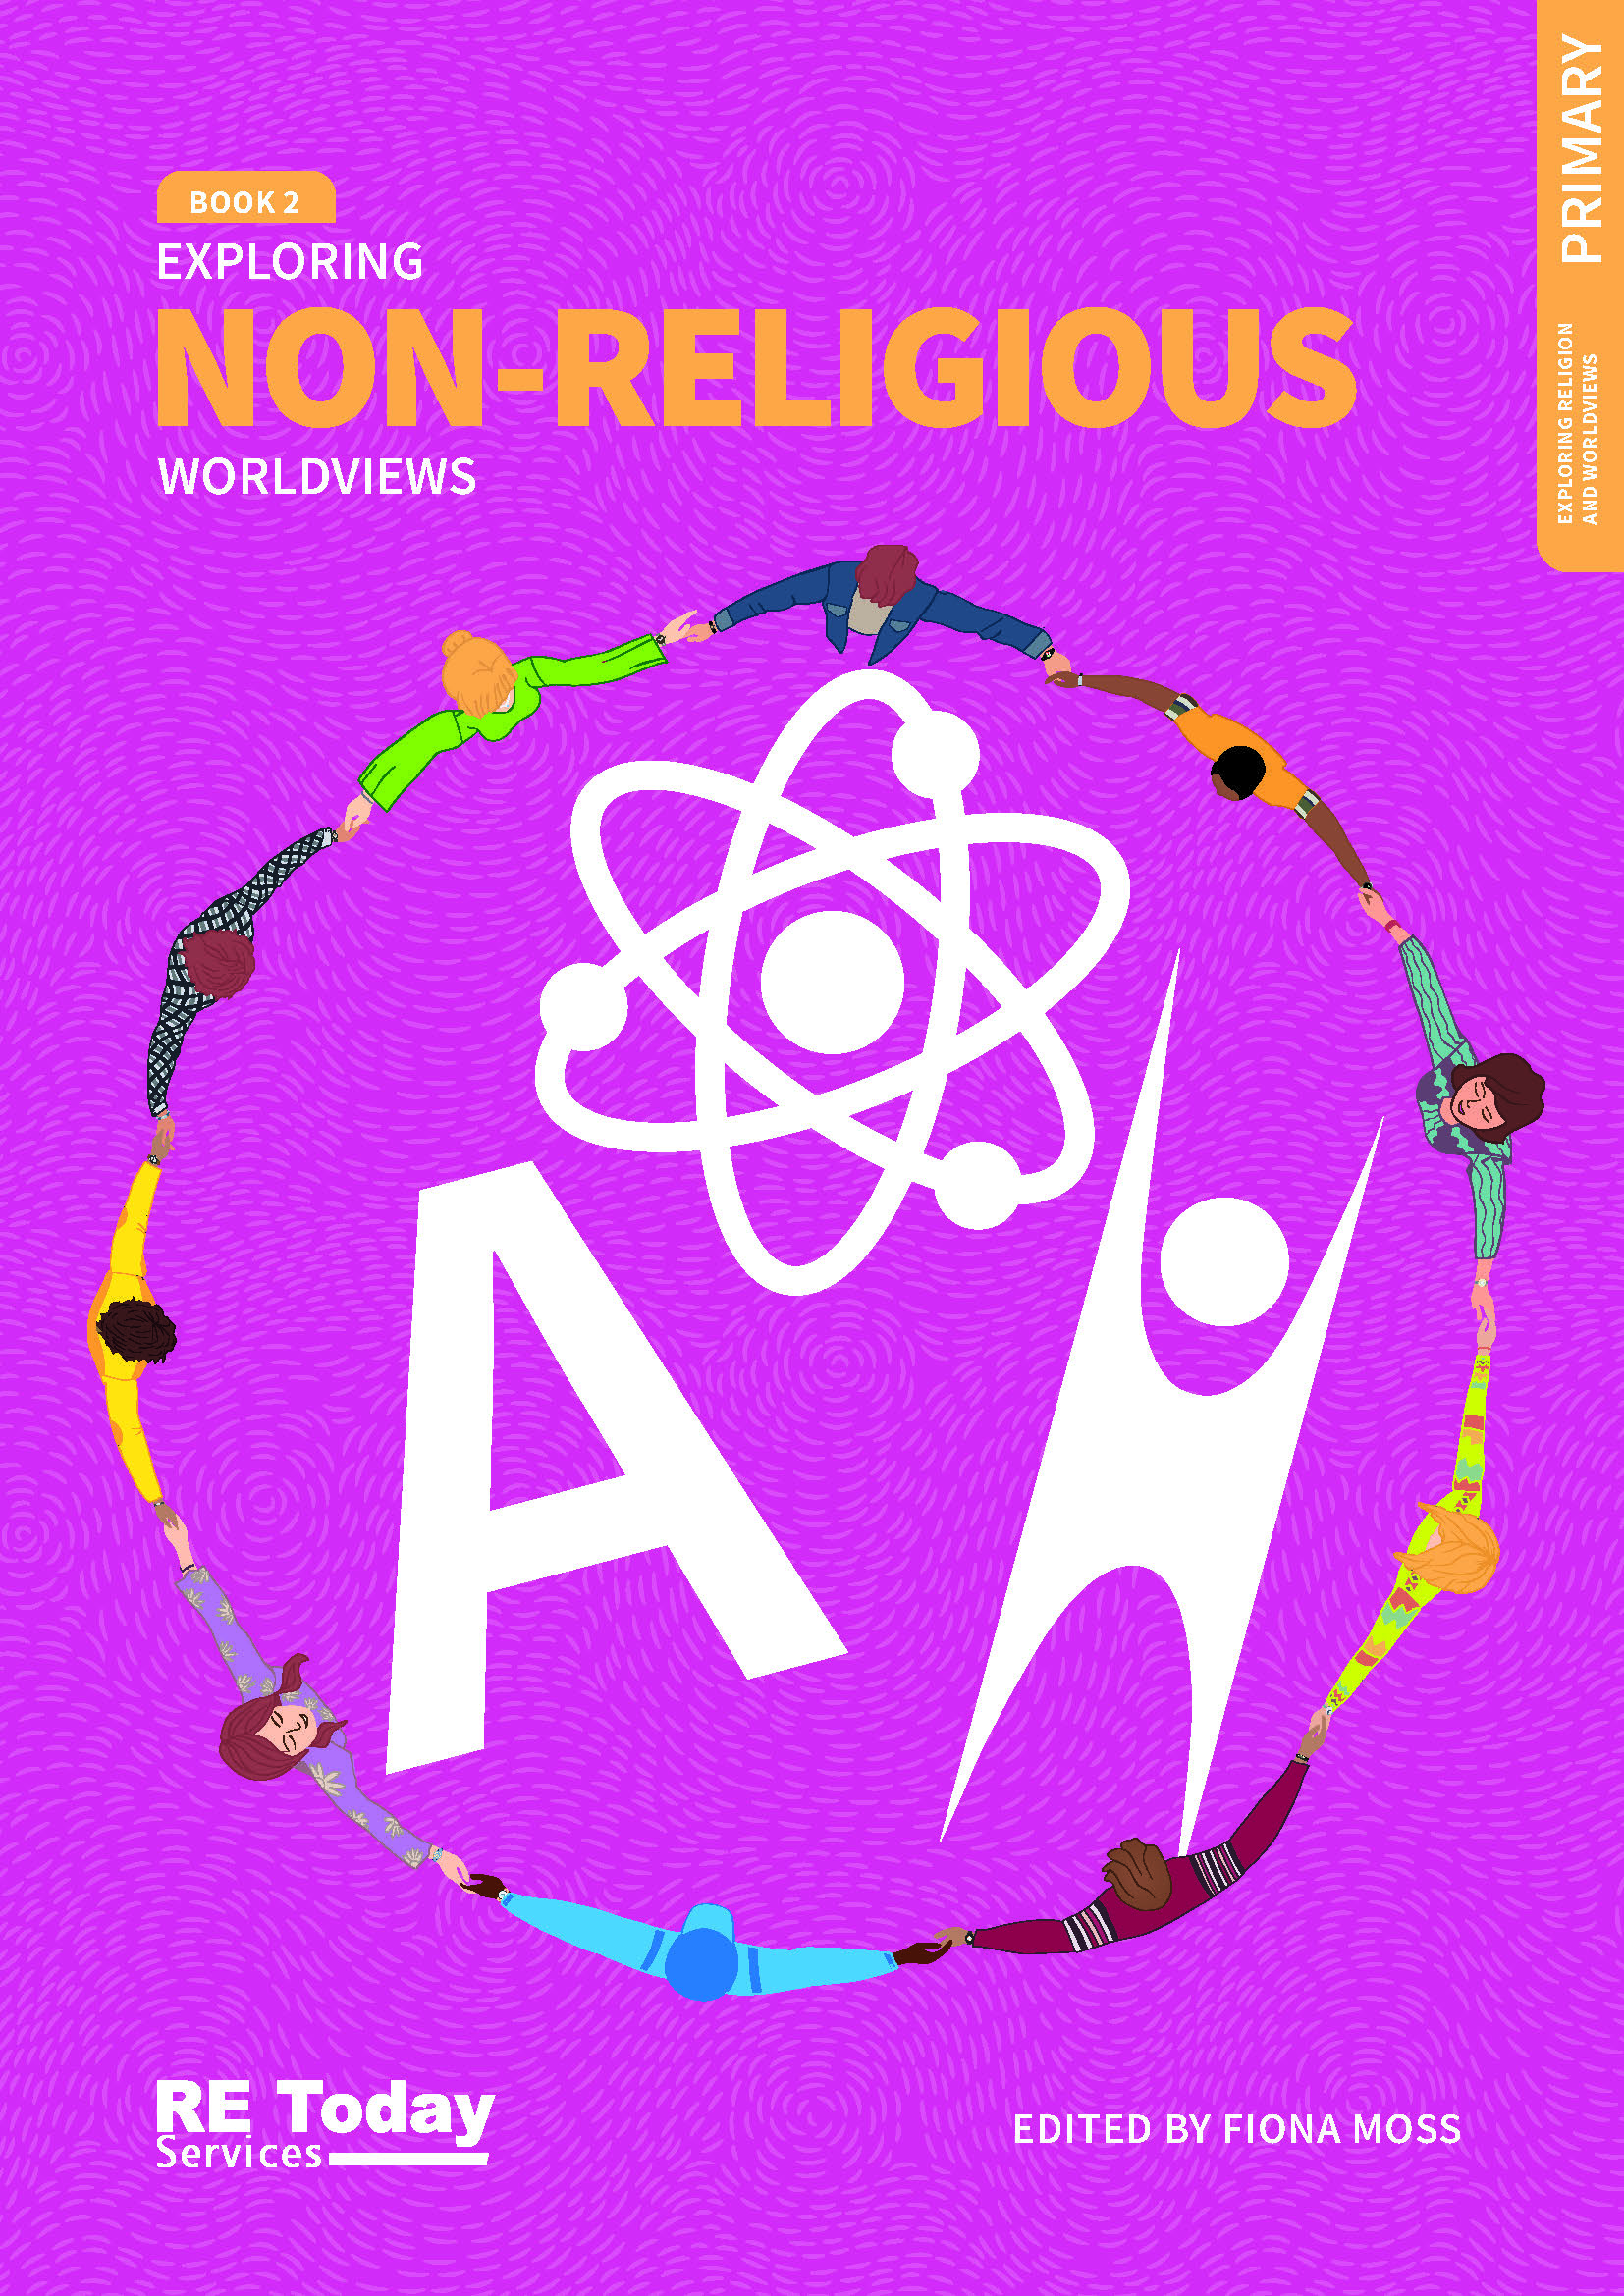 Primary religious education curriculum book - Exploring non-religious worldviews RE Today Services